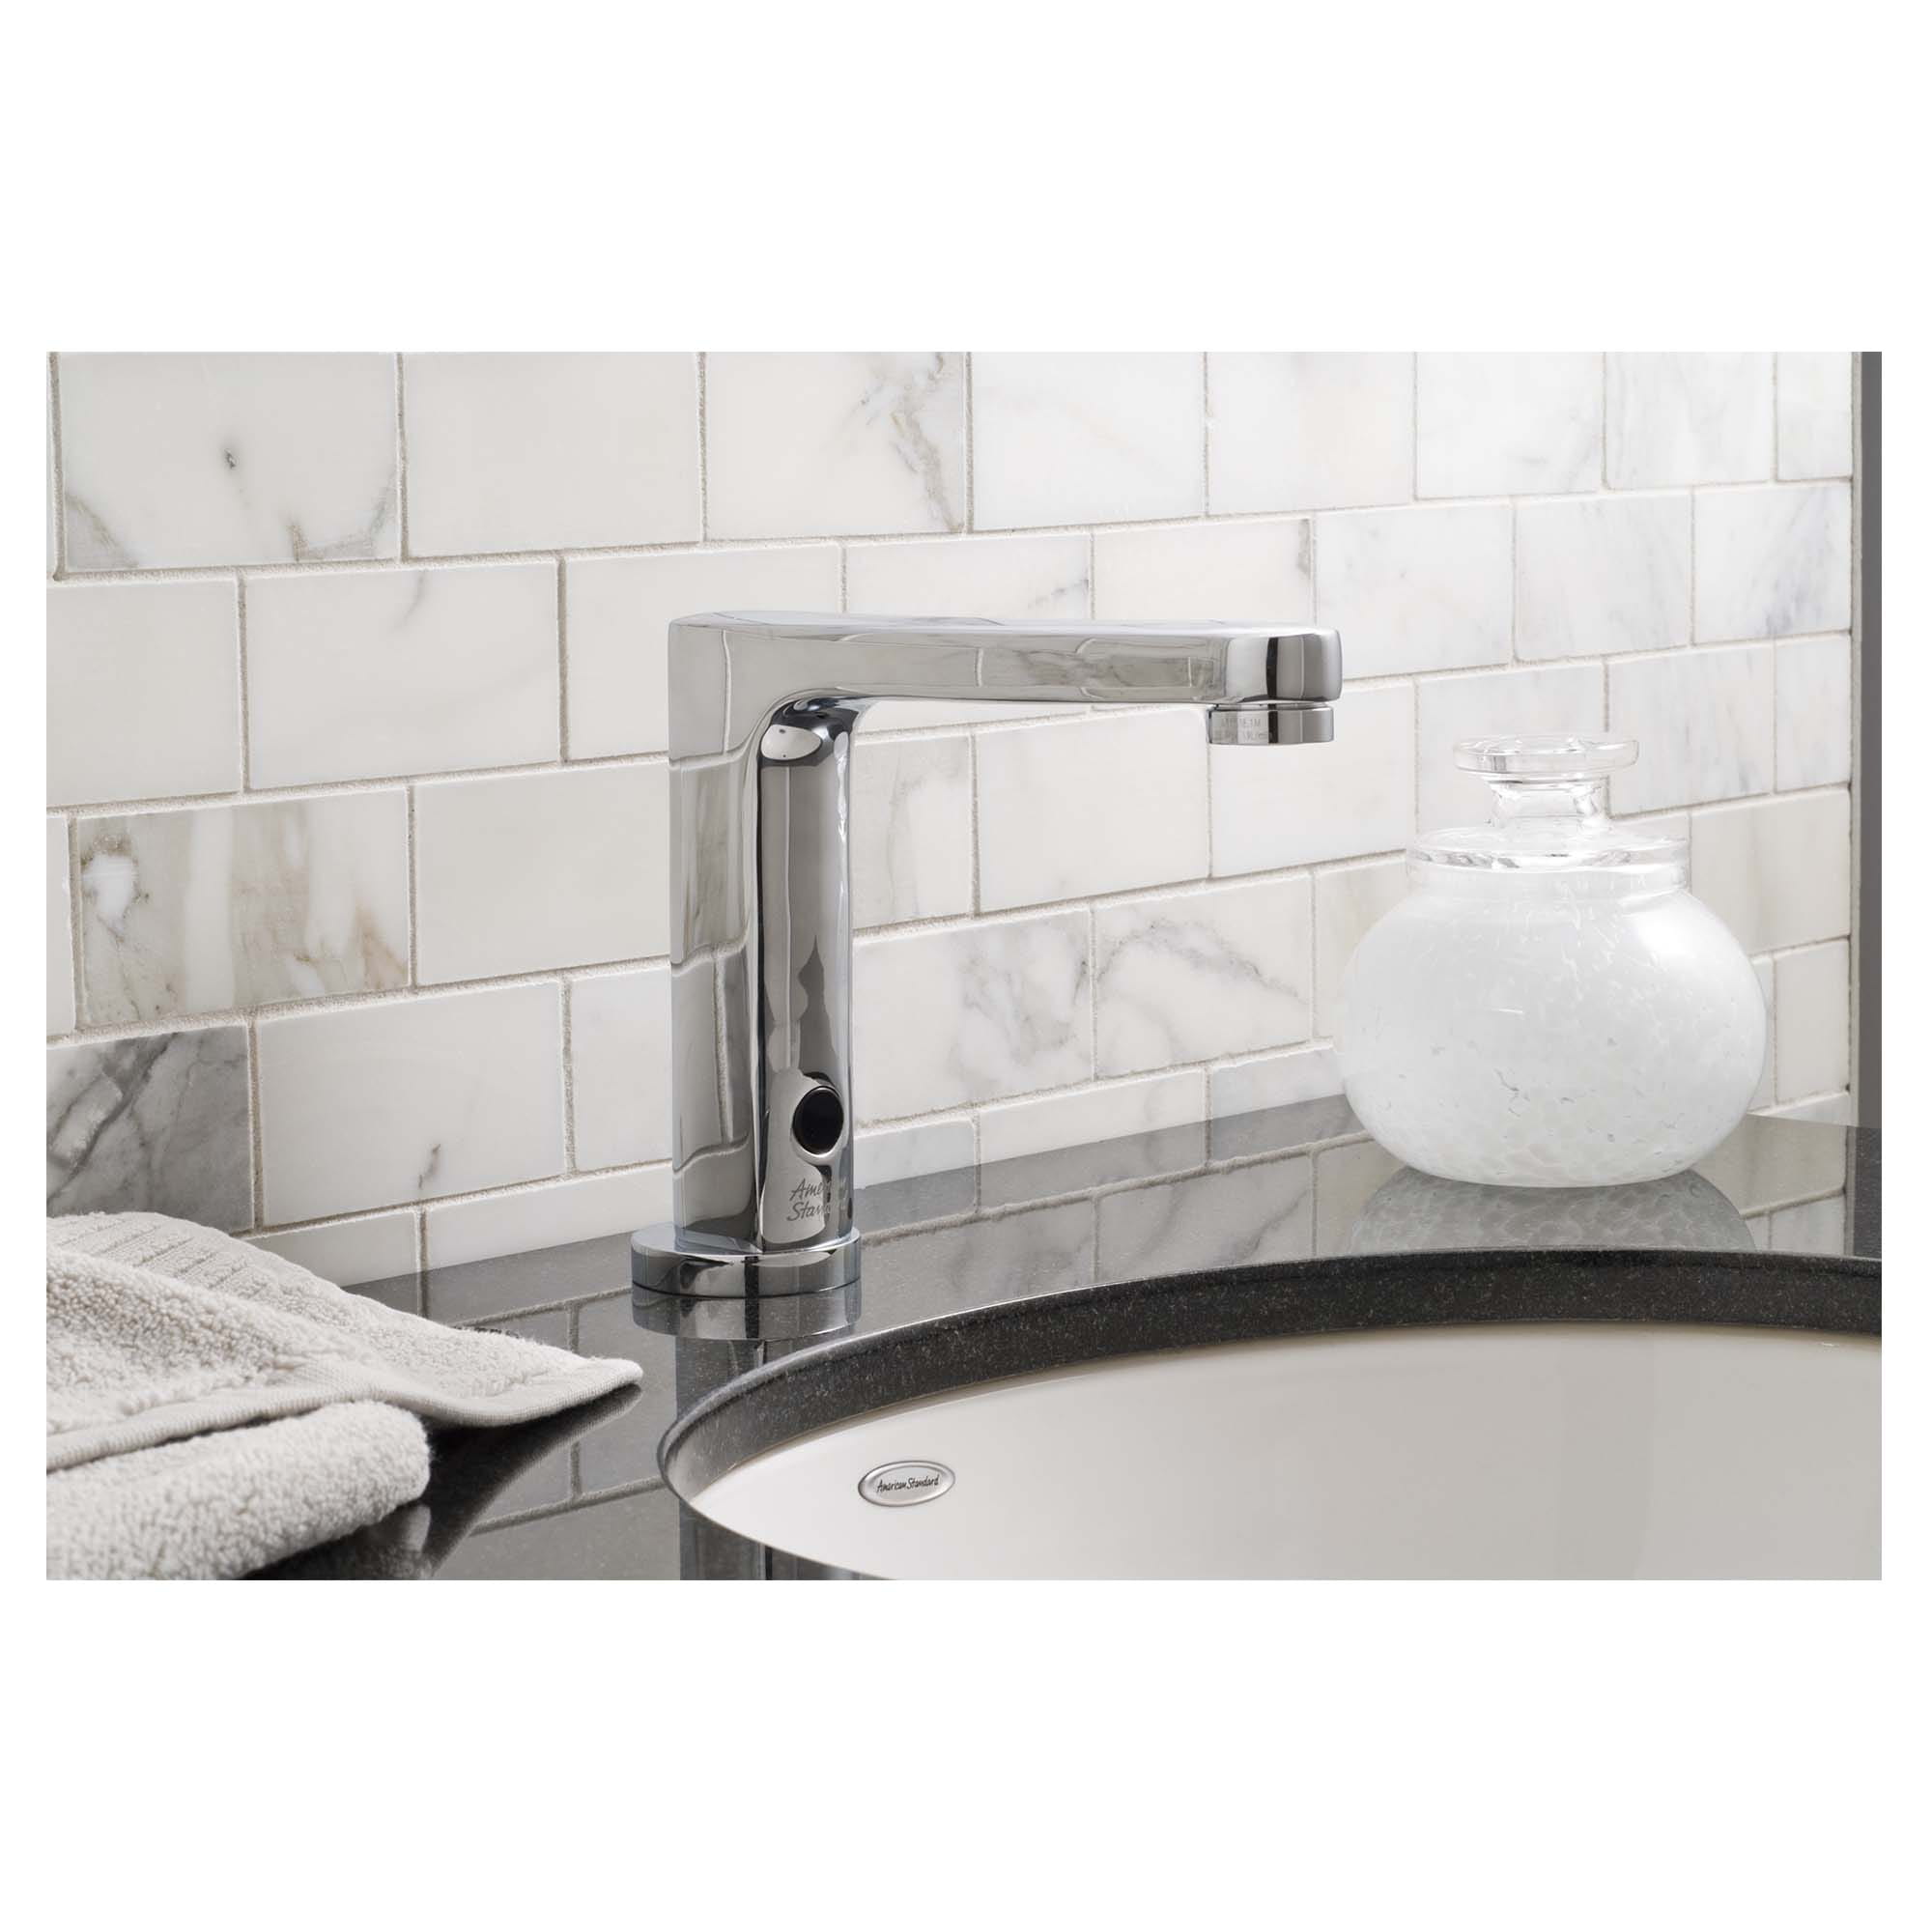 Moments® Selectronic® Touchless Faucet, Base Model, 1.5 gpm/5.7 Lpm